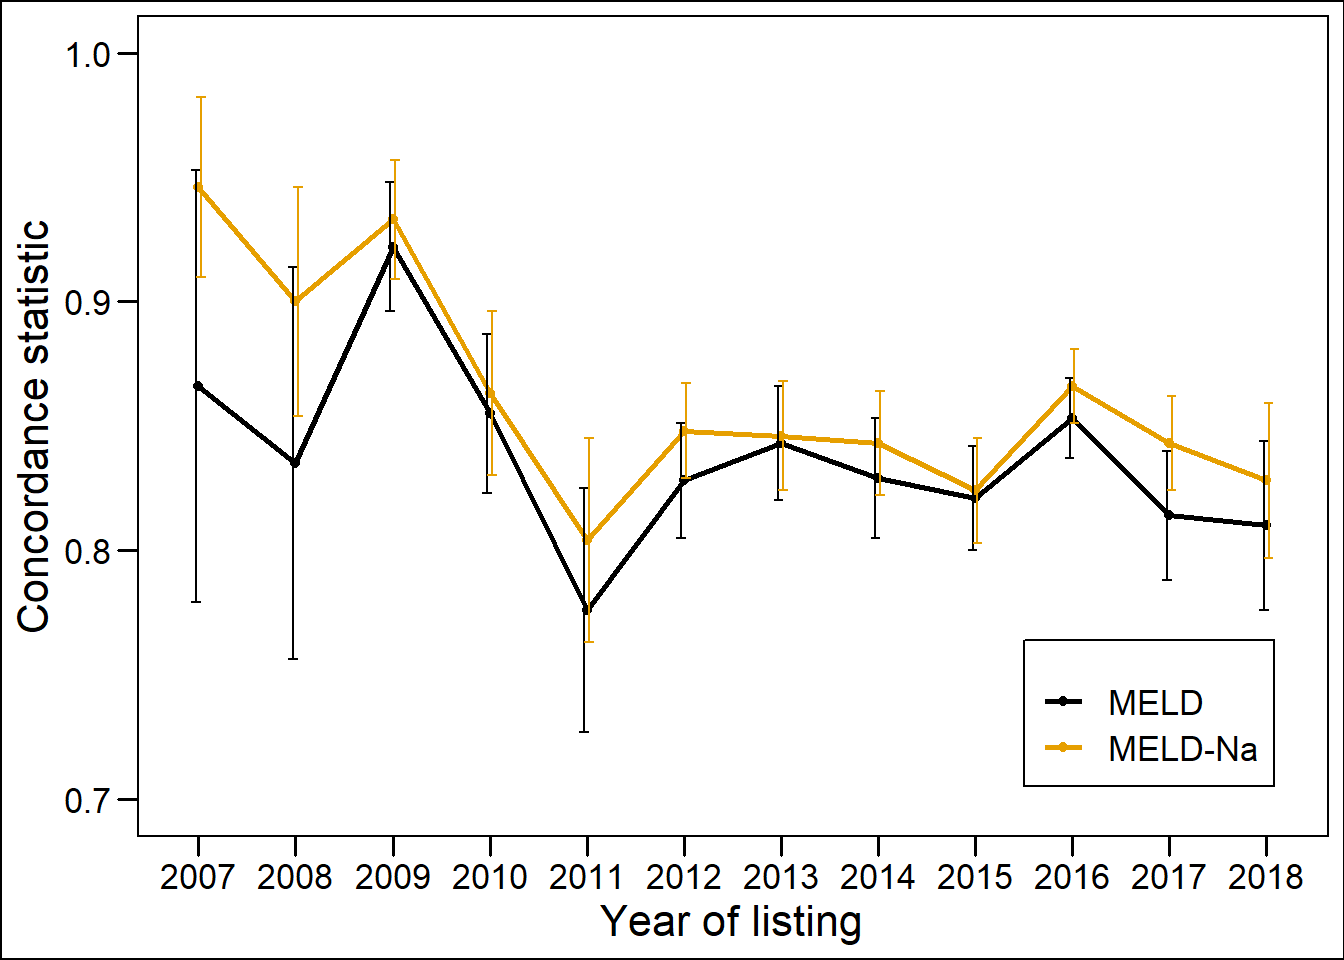 The concordance statistics (c-indices) for 90-day mortality of MELD and MELD-Na between 2007 and 2018.